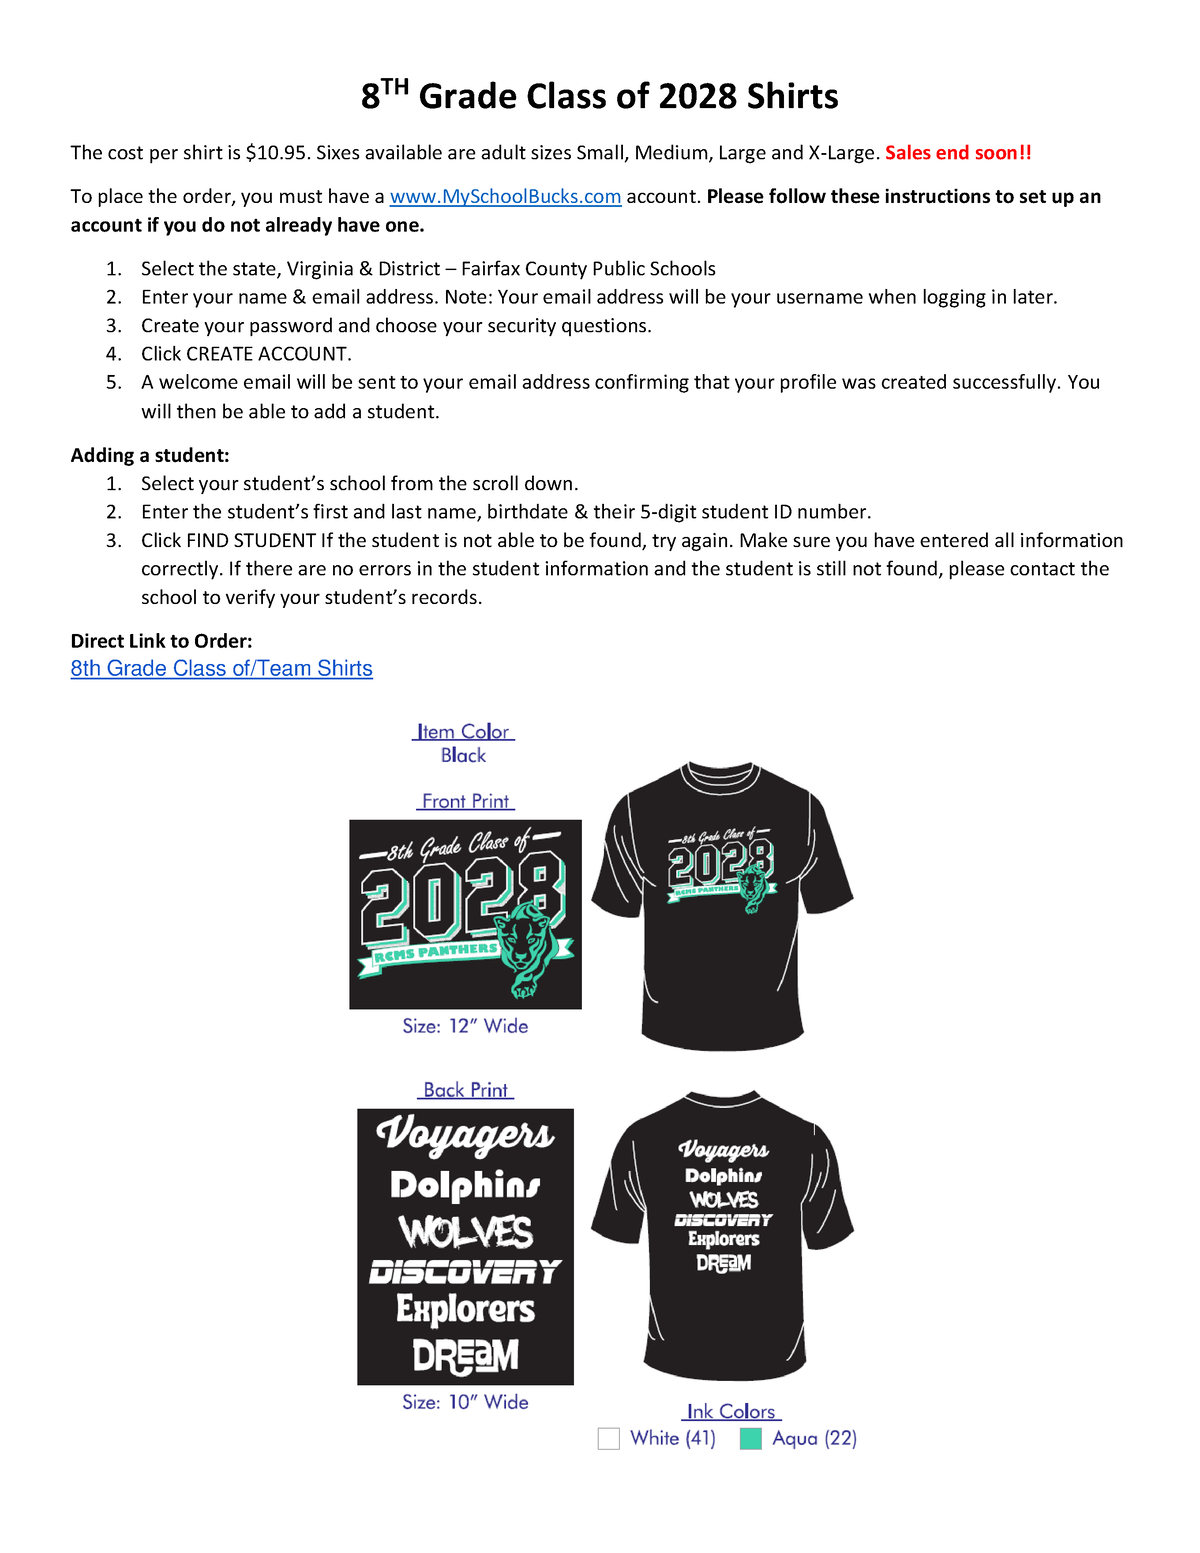 8TH Grade Class of 2028 Shirts - 8 TH Grade Class of 202 8 Shirts The ...